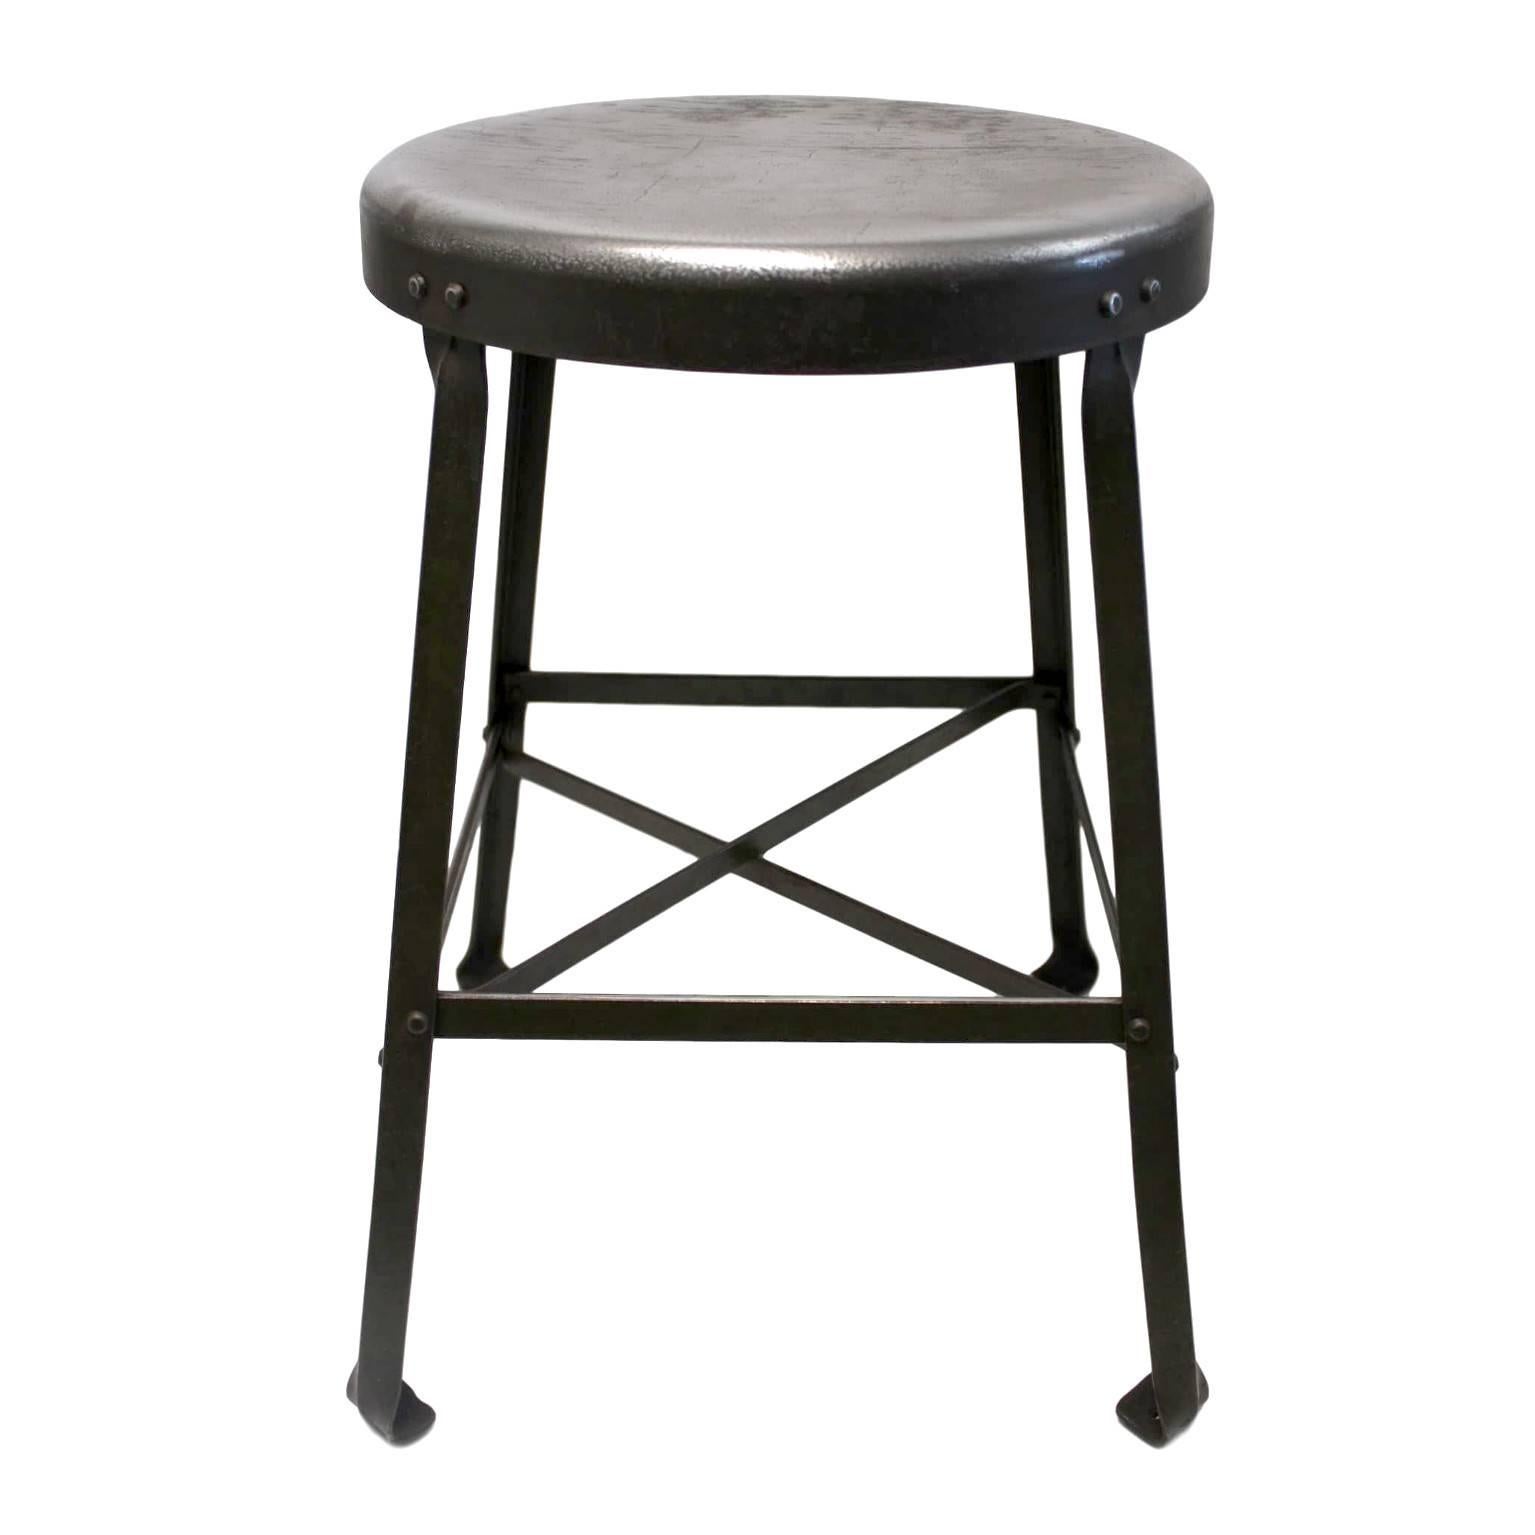 This great little stool was made by the Angle Steel Stool company and was used in a Pharmacy Dept lab at Purdue University its whole life. Stool features a heavy-duty, riveted, bridge-like construction and a gorgeous 70+ year worn patina to the